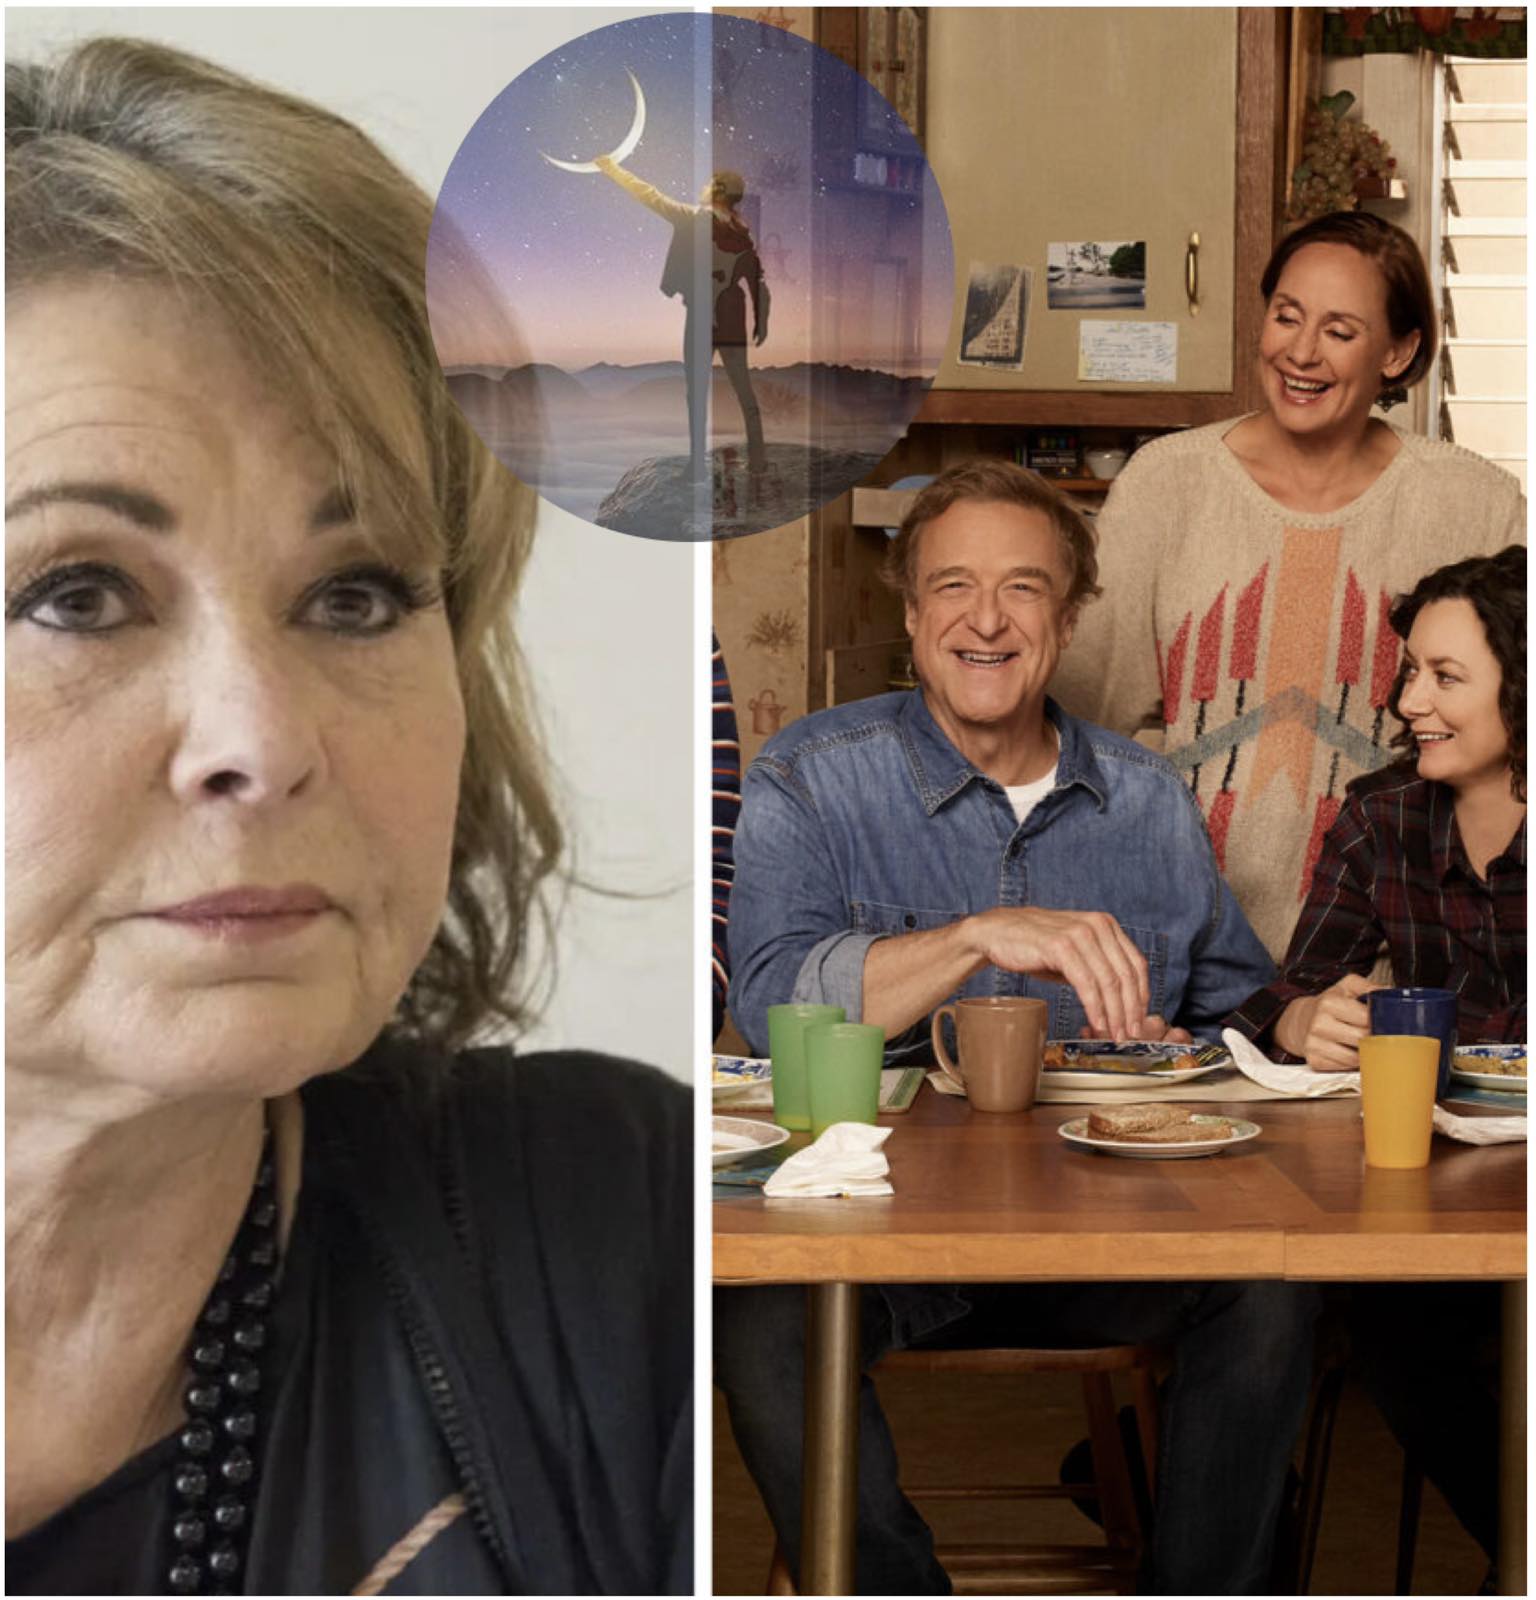 Roseanne Barr Rejects ABC’s Offer To Save The Conners, “I’m Not Saving Your Show”